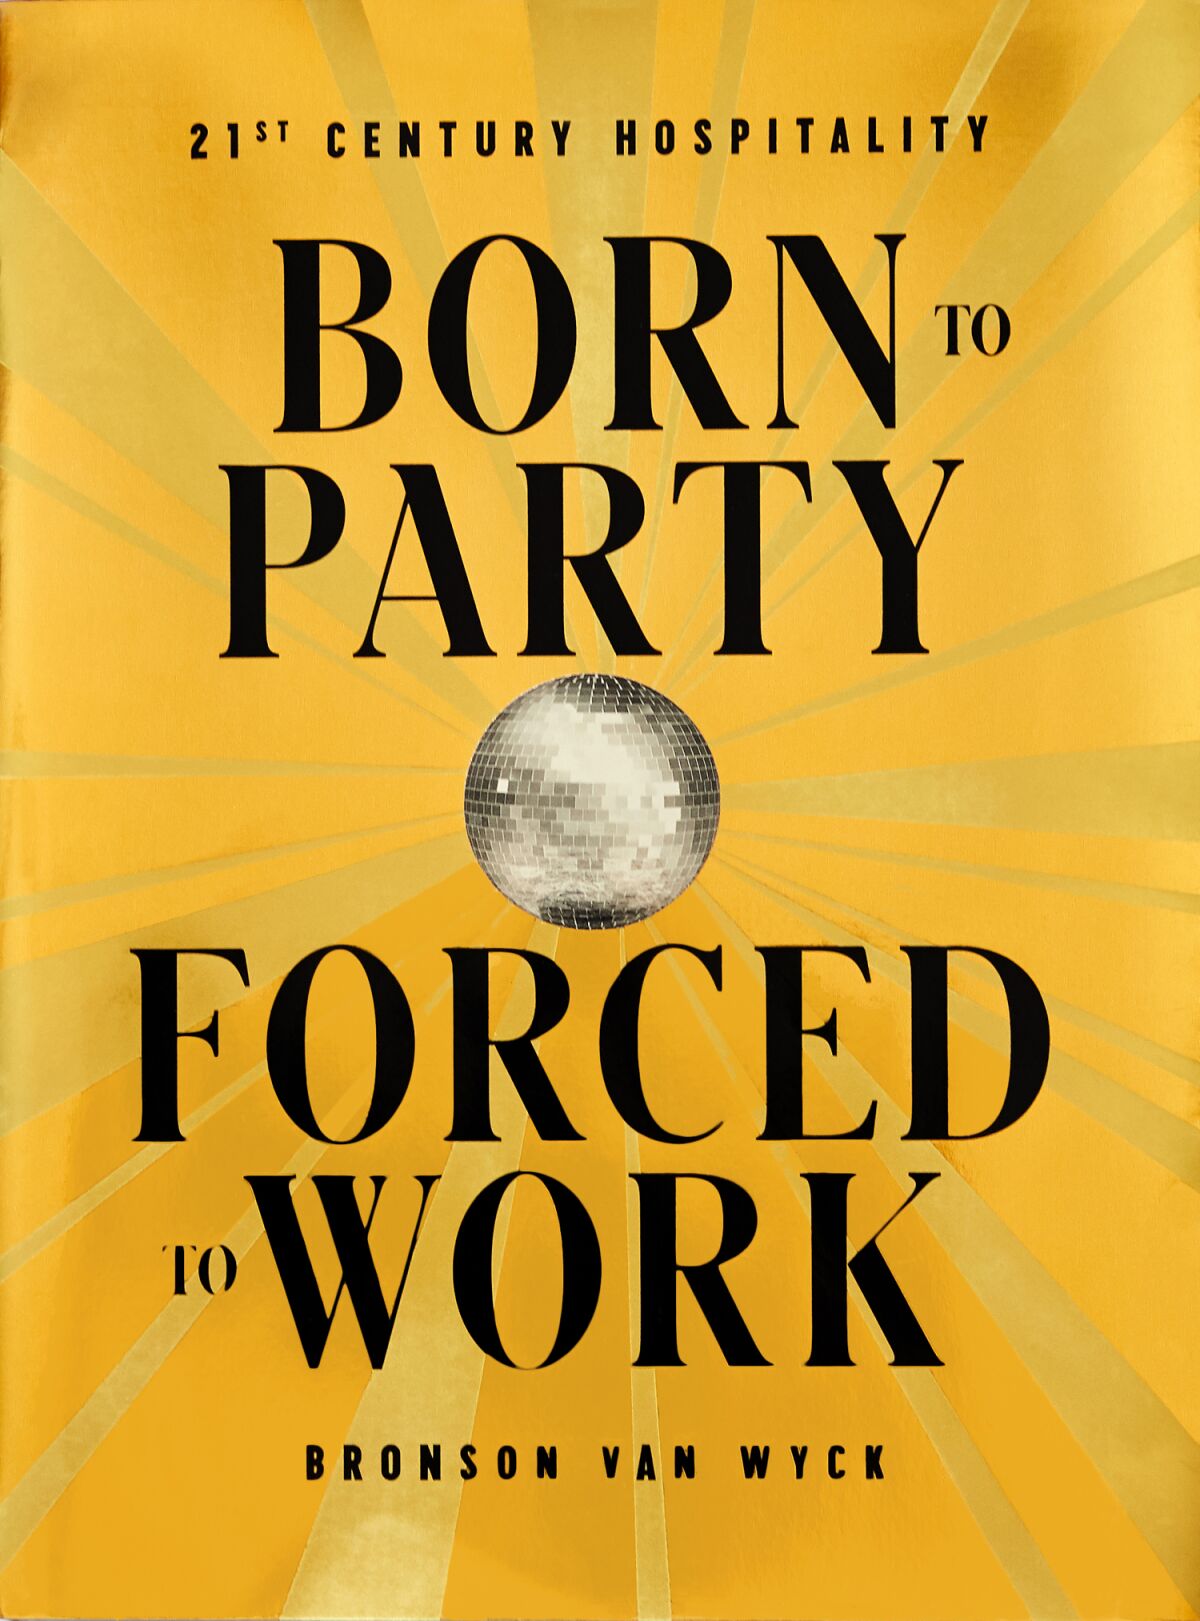 “Born to Party, Forced to Work"